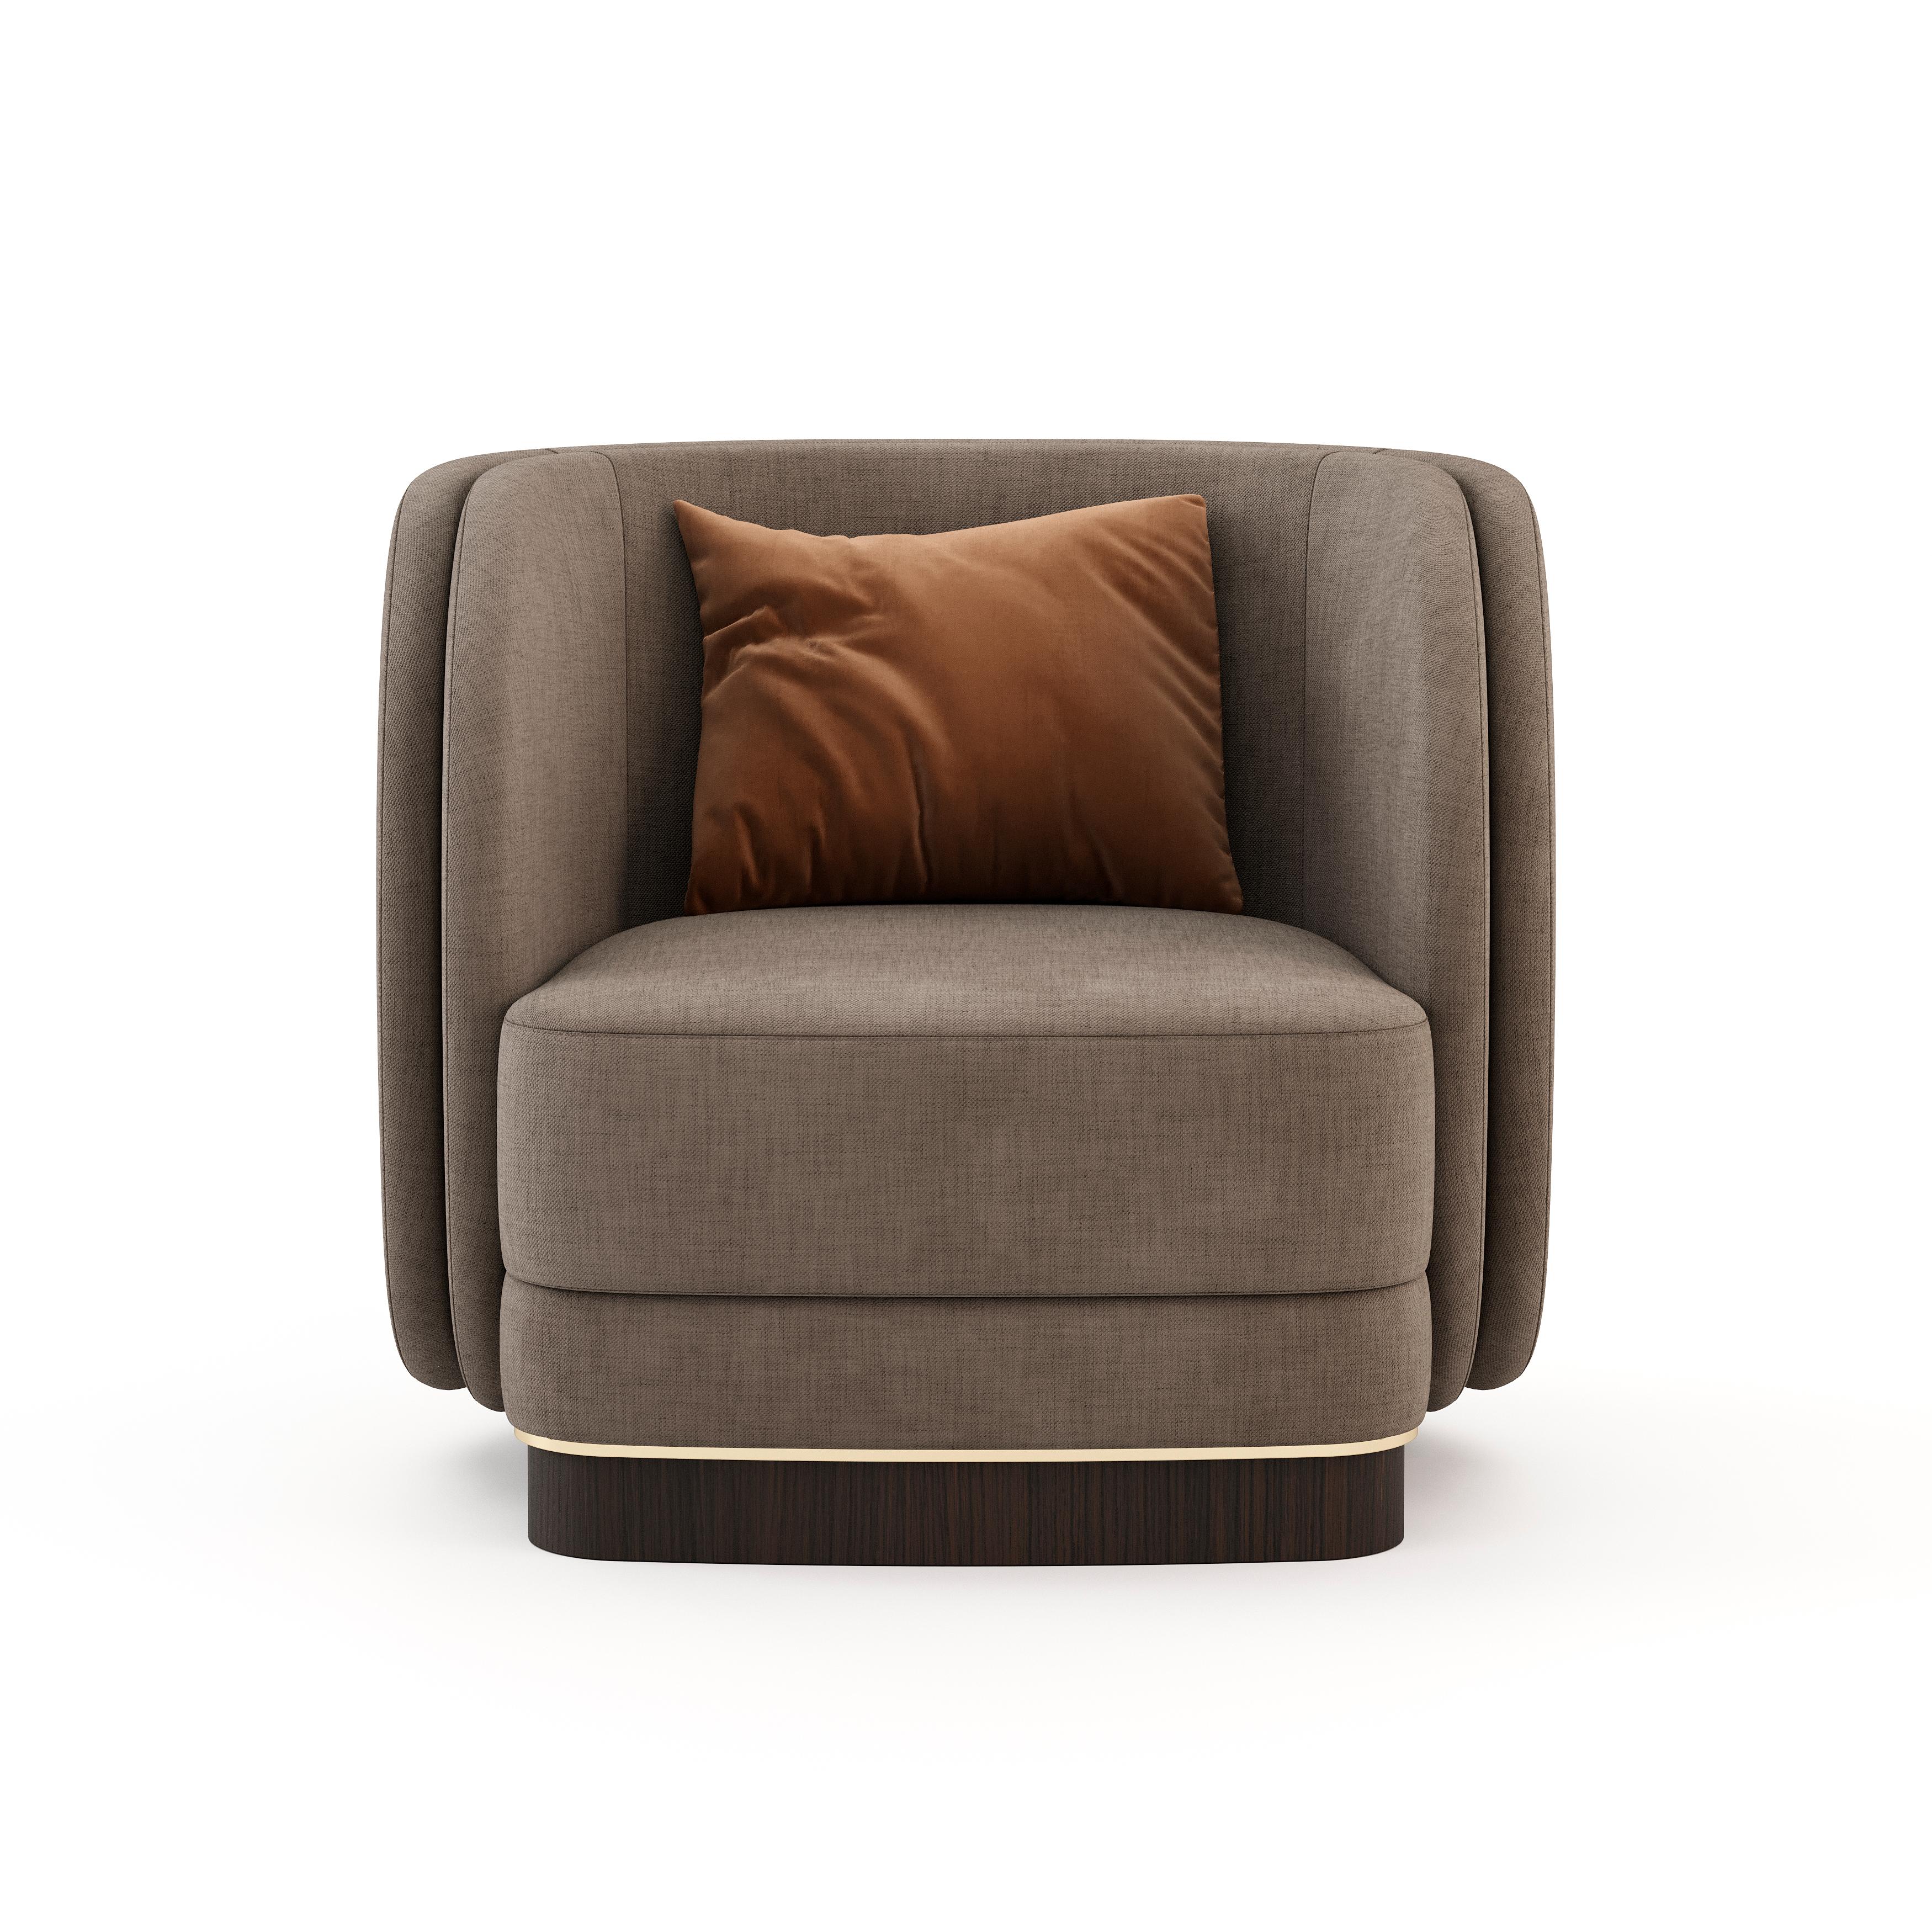 Ambrose is a one-of-a-kind armchair with a sleek convex back. It features a discreet wooden base to support a majestic upholstered armchair with a comfortable seat.

* Available in different finishes.